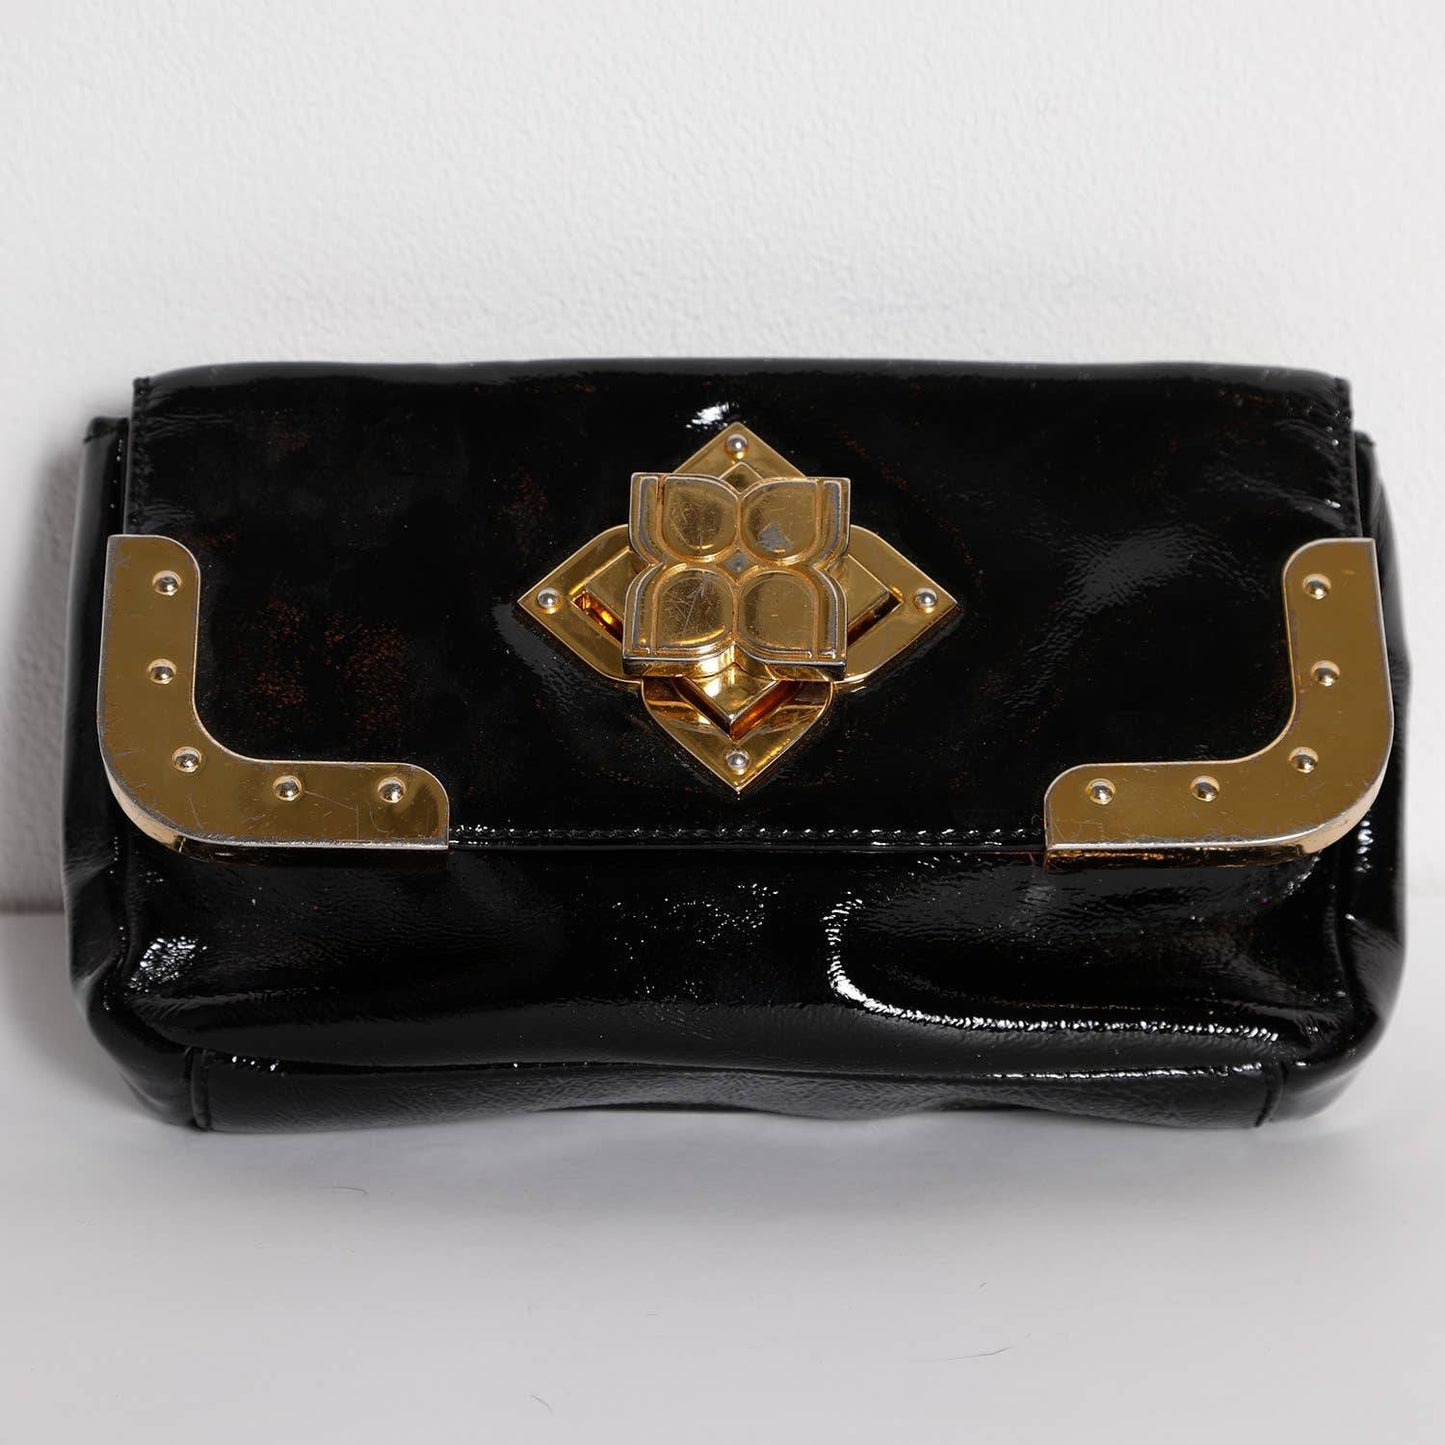 BCBGMAXAZRIA Black Patent Leather Hand Bag with Gold Chain